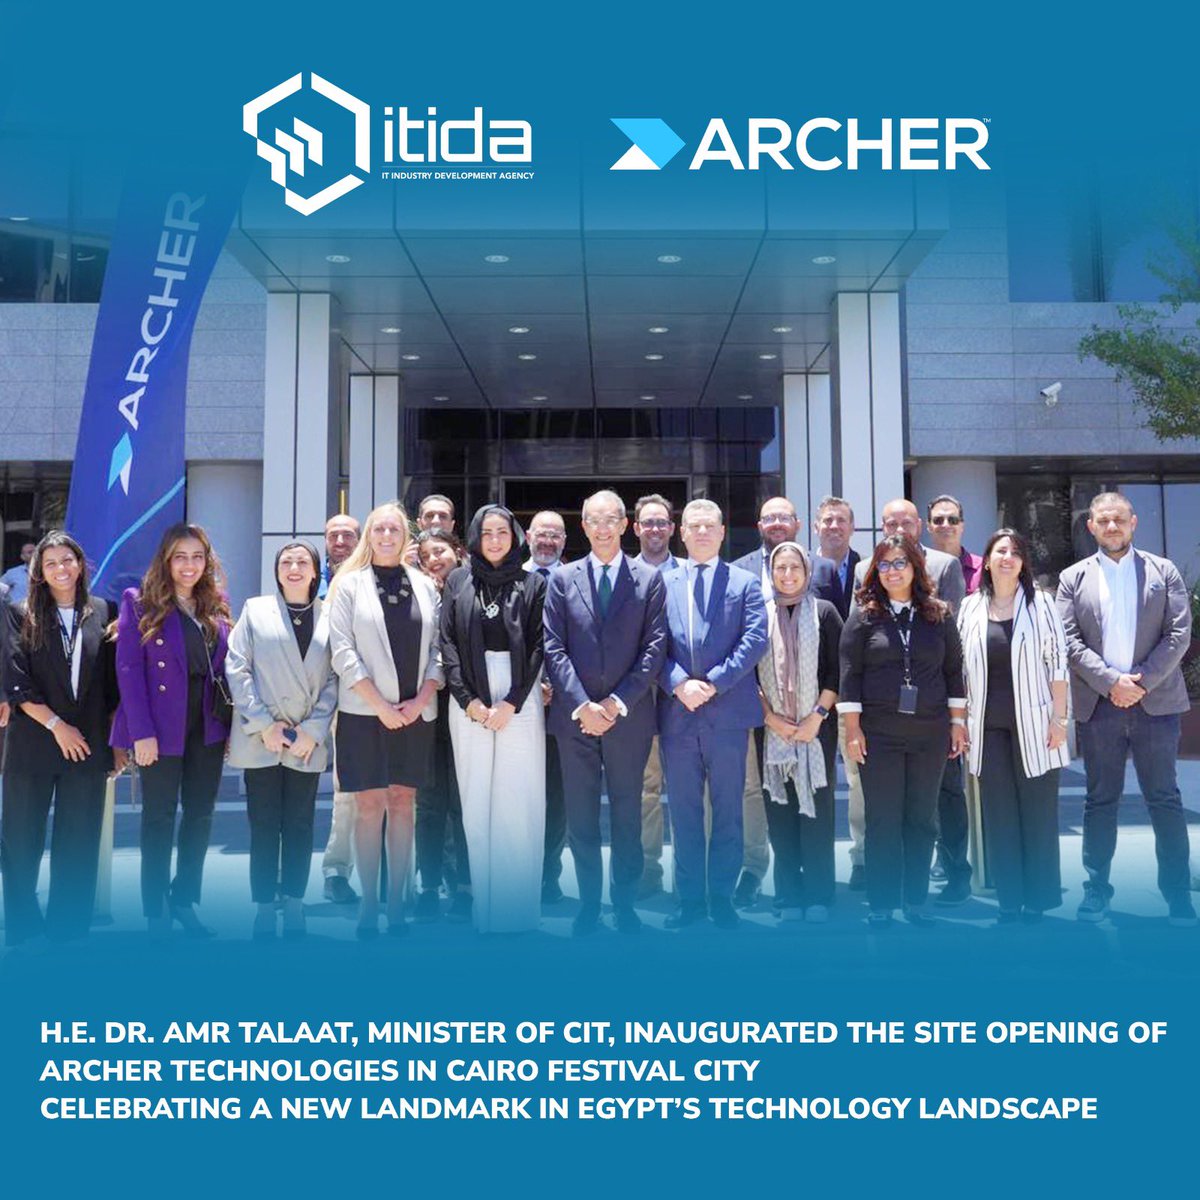 🎉 Proud to announce the inauguration of Archer Integrated Risk Management's new office at Cairo Festival City! Joined by H.E. Dr. Amr Talaat, Minister of ICT, and Eng. Ahmed Elzaher, CEO of ITIDA, we celebrate this milestone. 🚀 #Archer #Egypt #TechLeadership